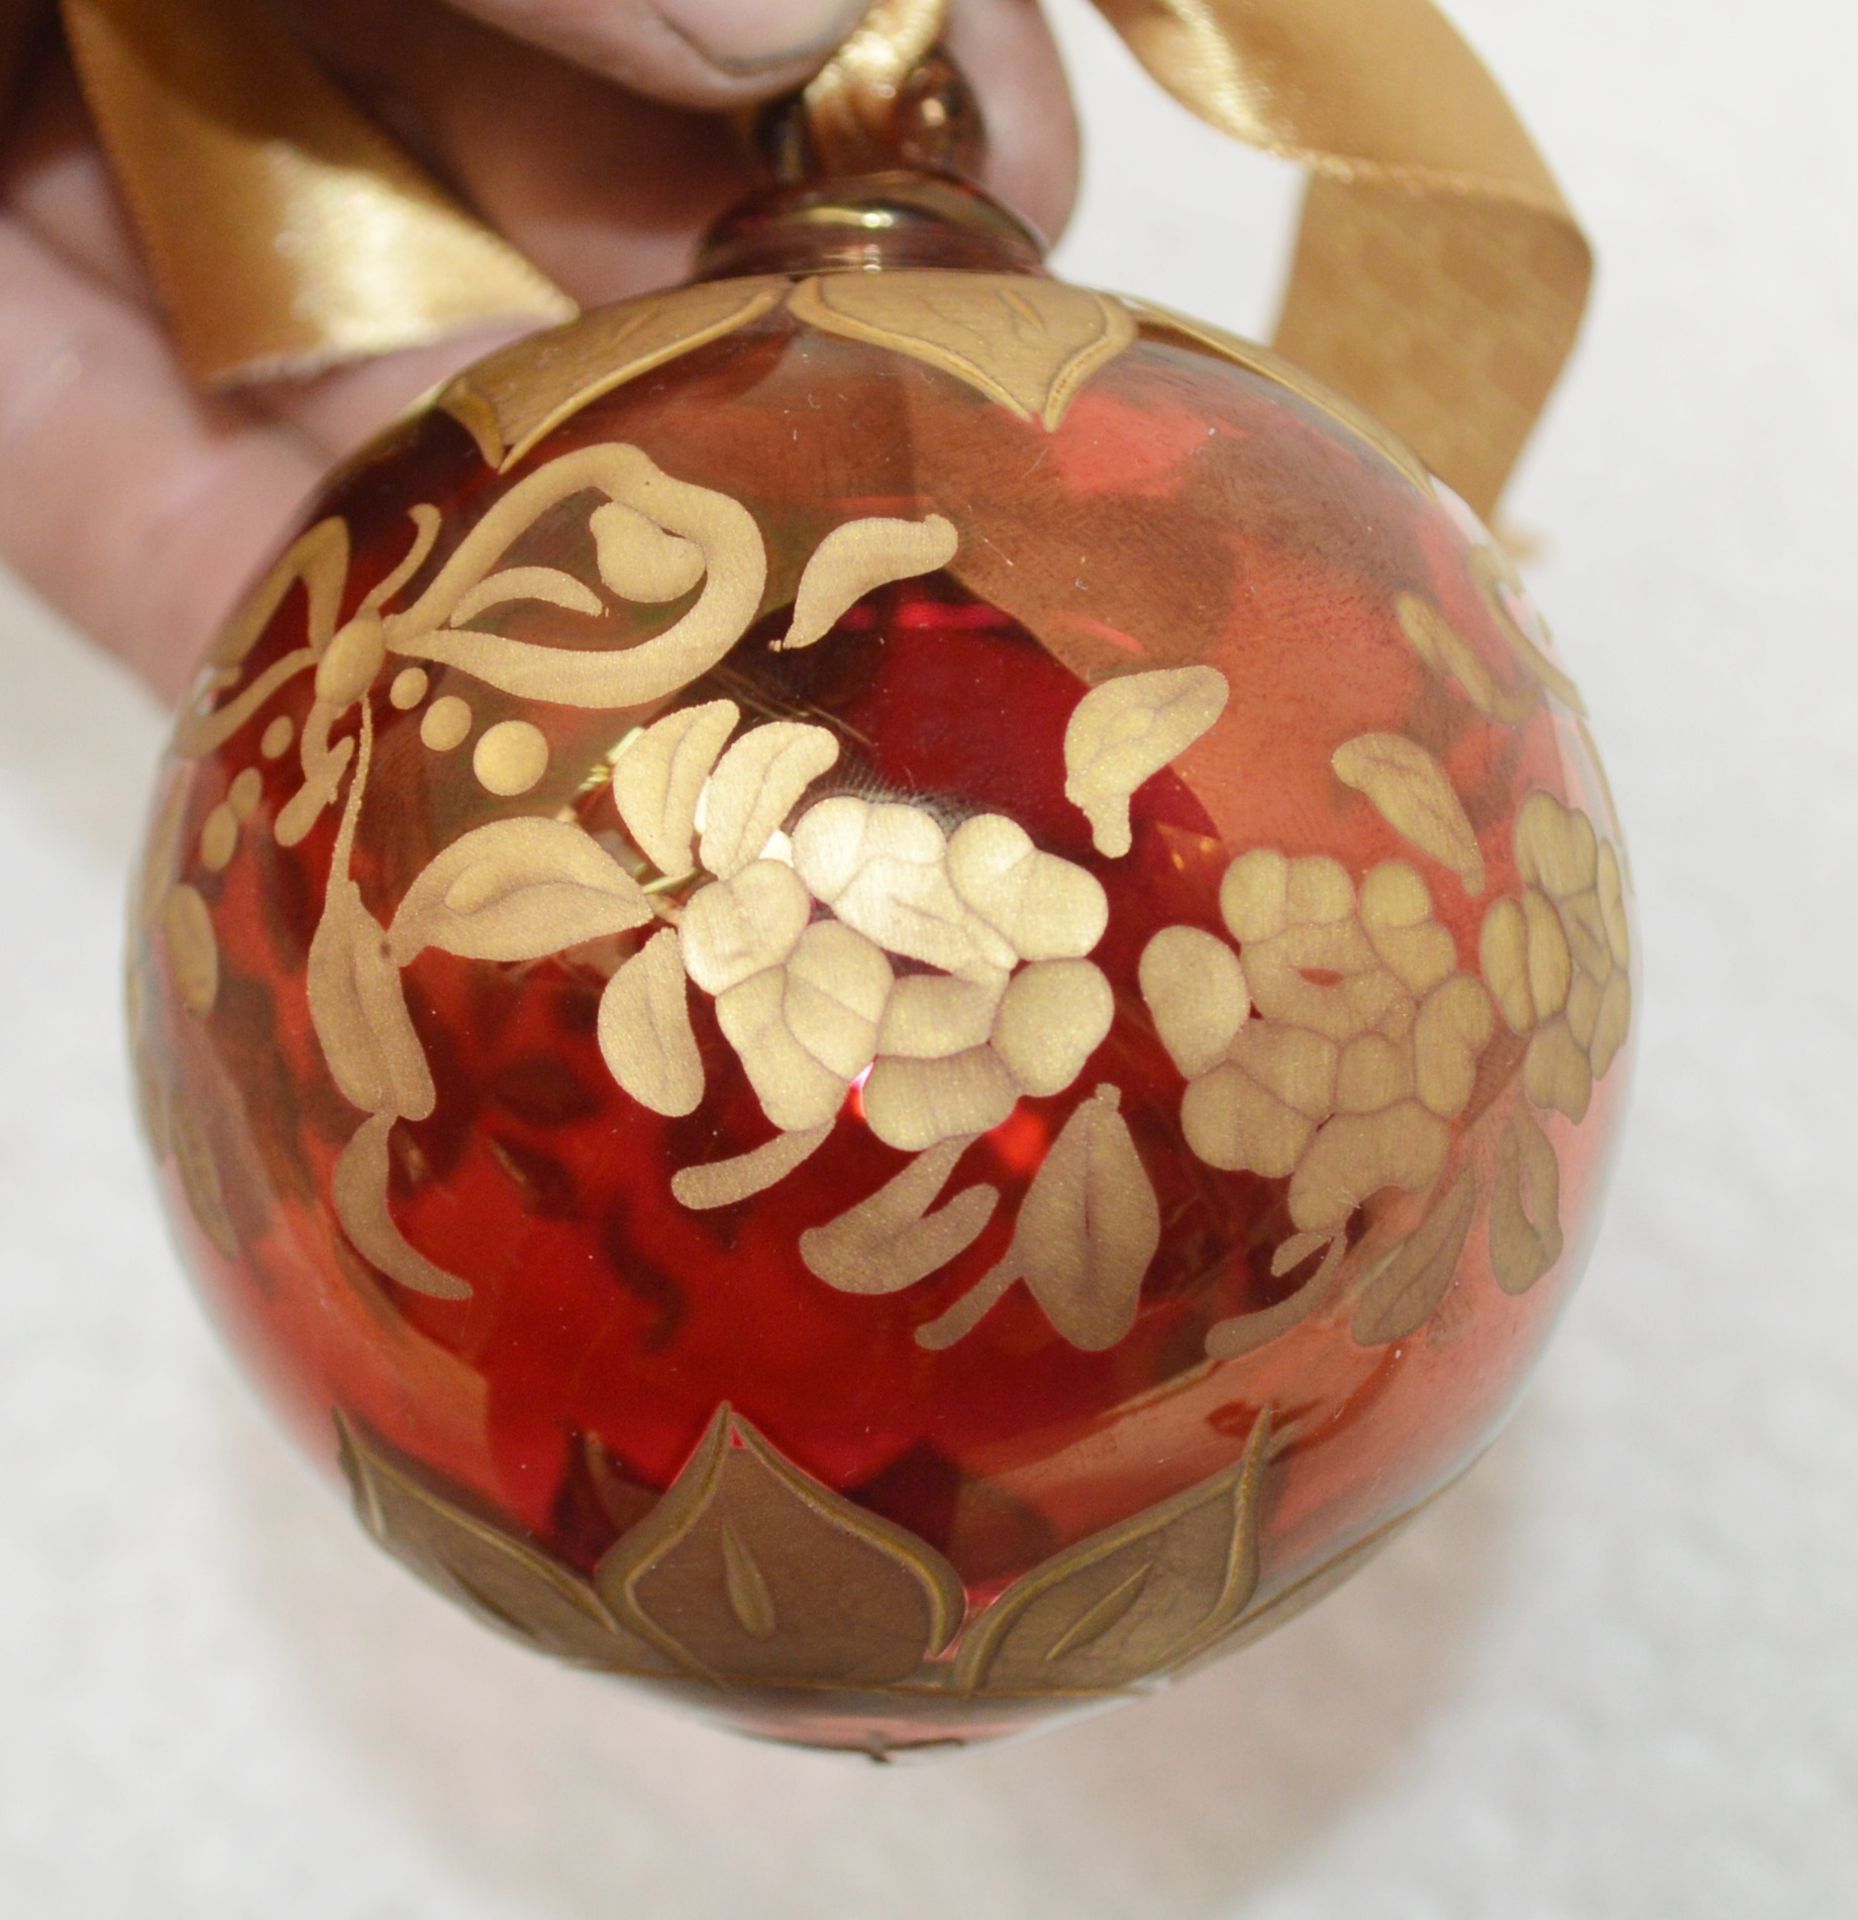 5 x BALDI 'Home Jewels' Italian Hand-crafted Artisan Glass Christmas Tree Decorations In Red / Gold - Image 4 of 4